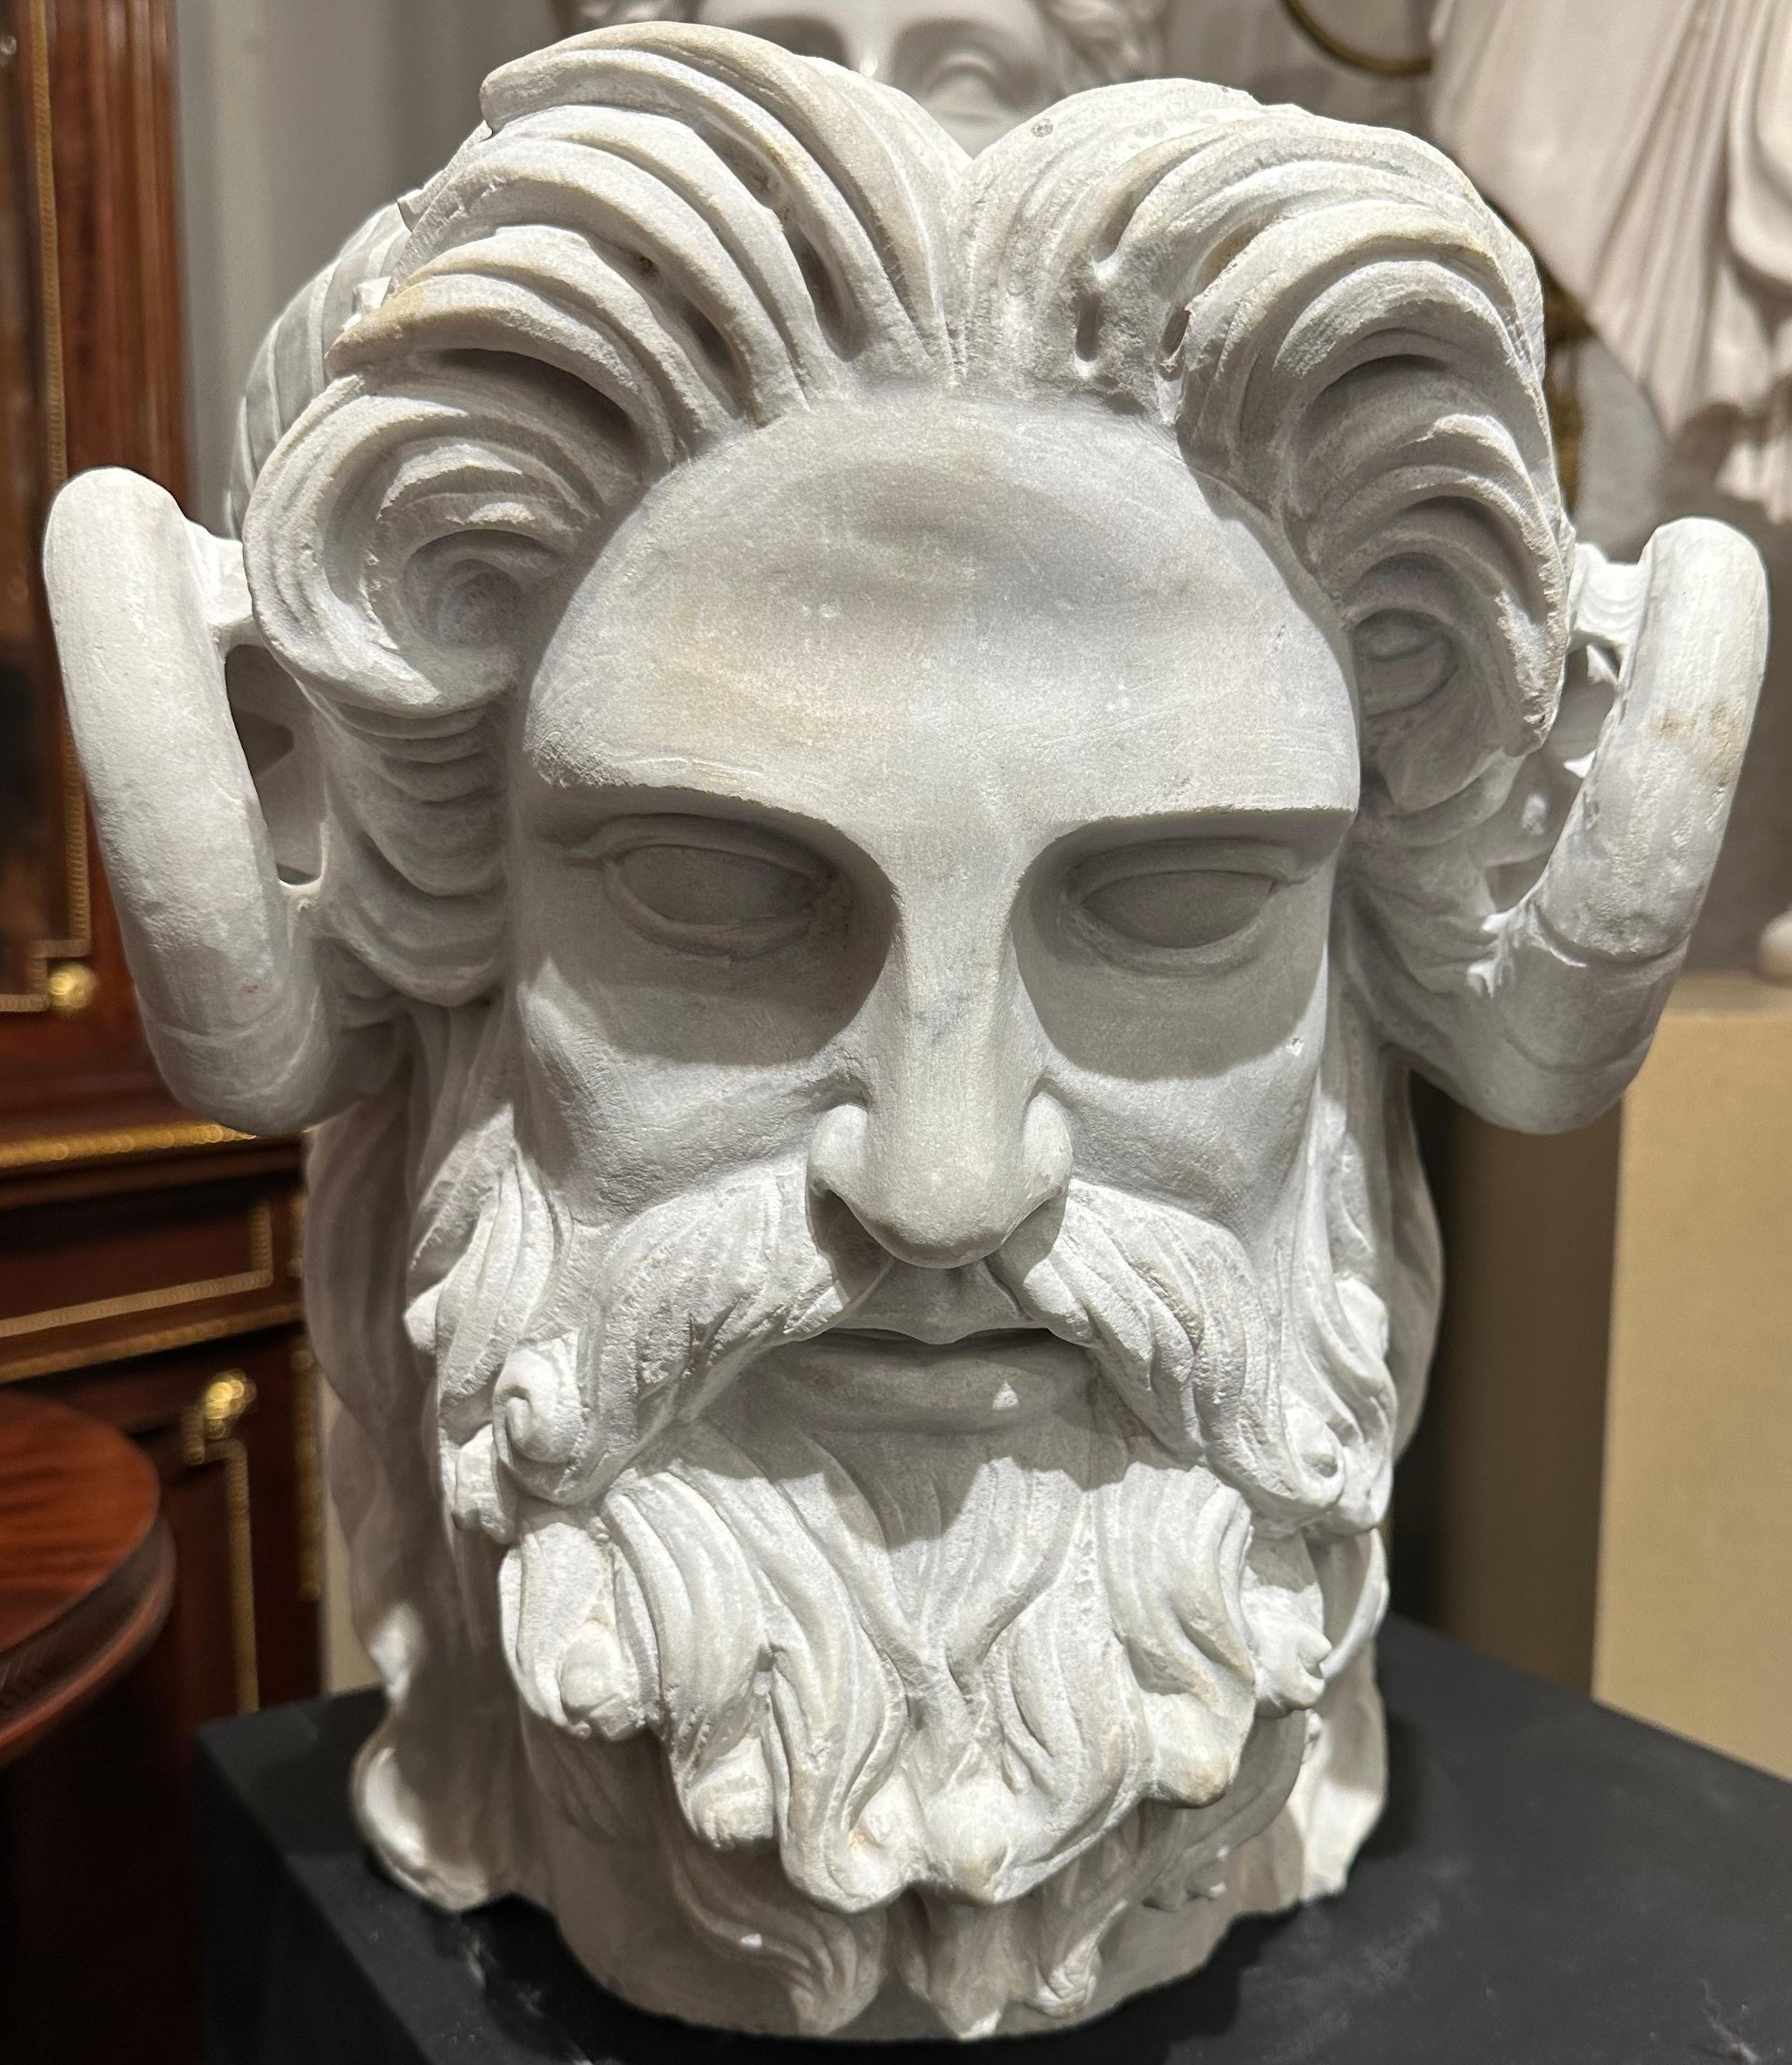 A detailed and beautifully carved marble bust of the Roman God Janus. The God of beginnings, endings, time, duality and boundaries, the openings of doorways, gates and passages. The two faces portray this duality. They are both expressively carved